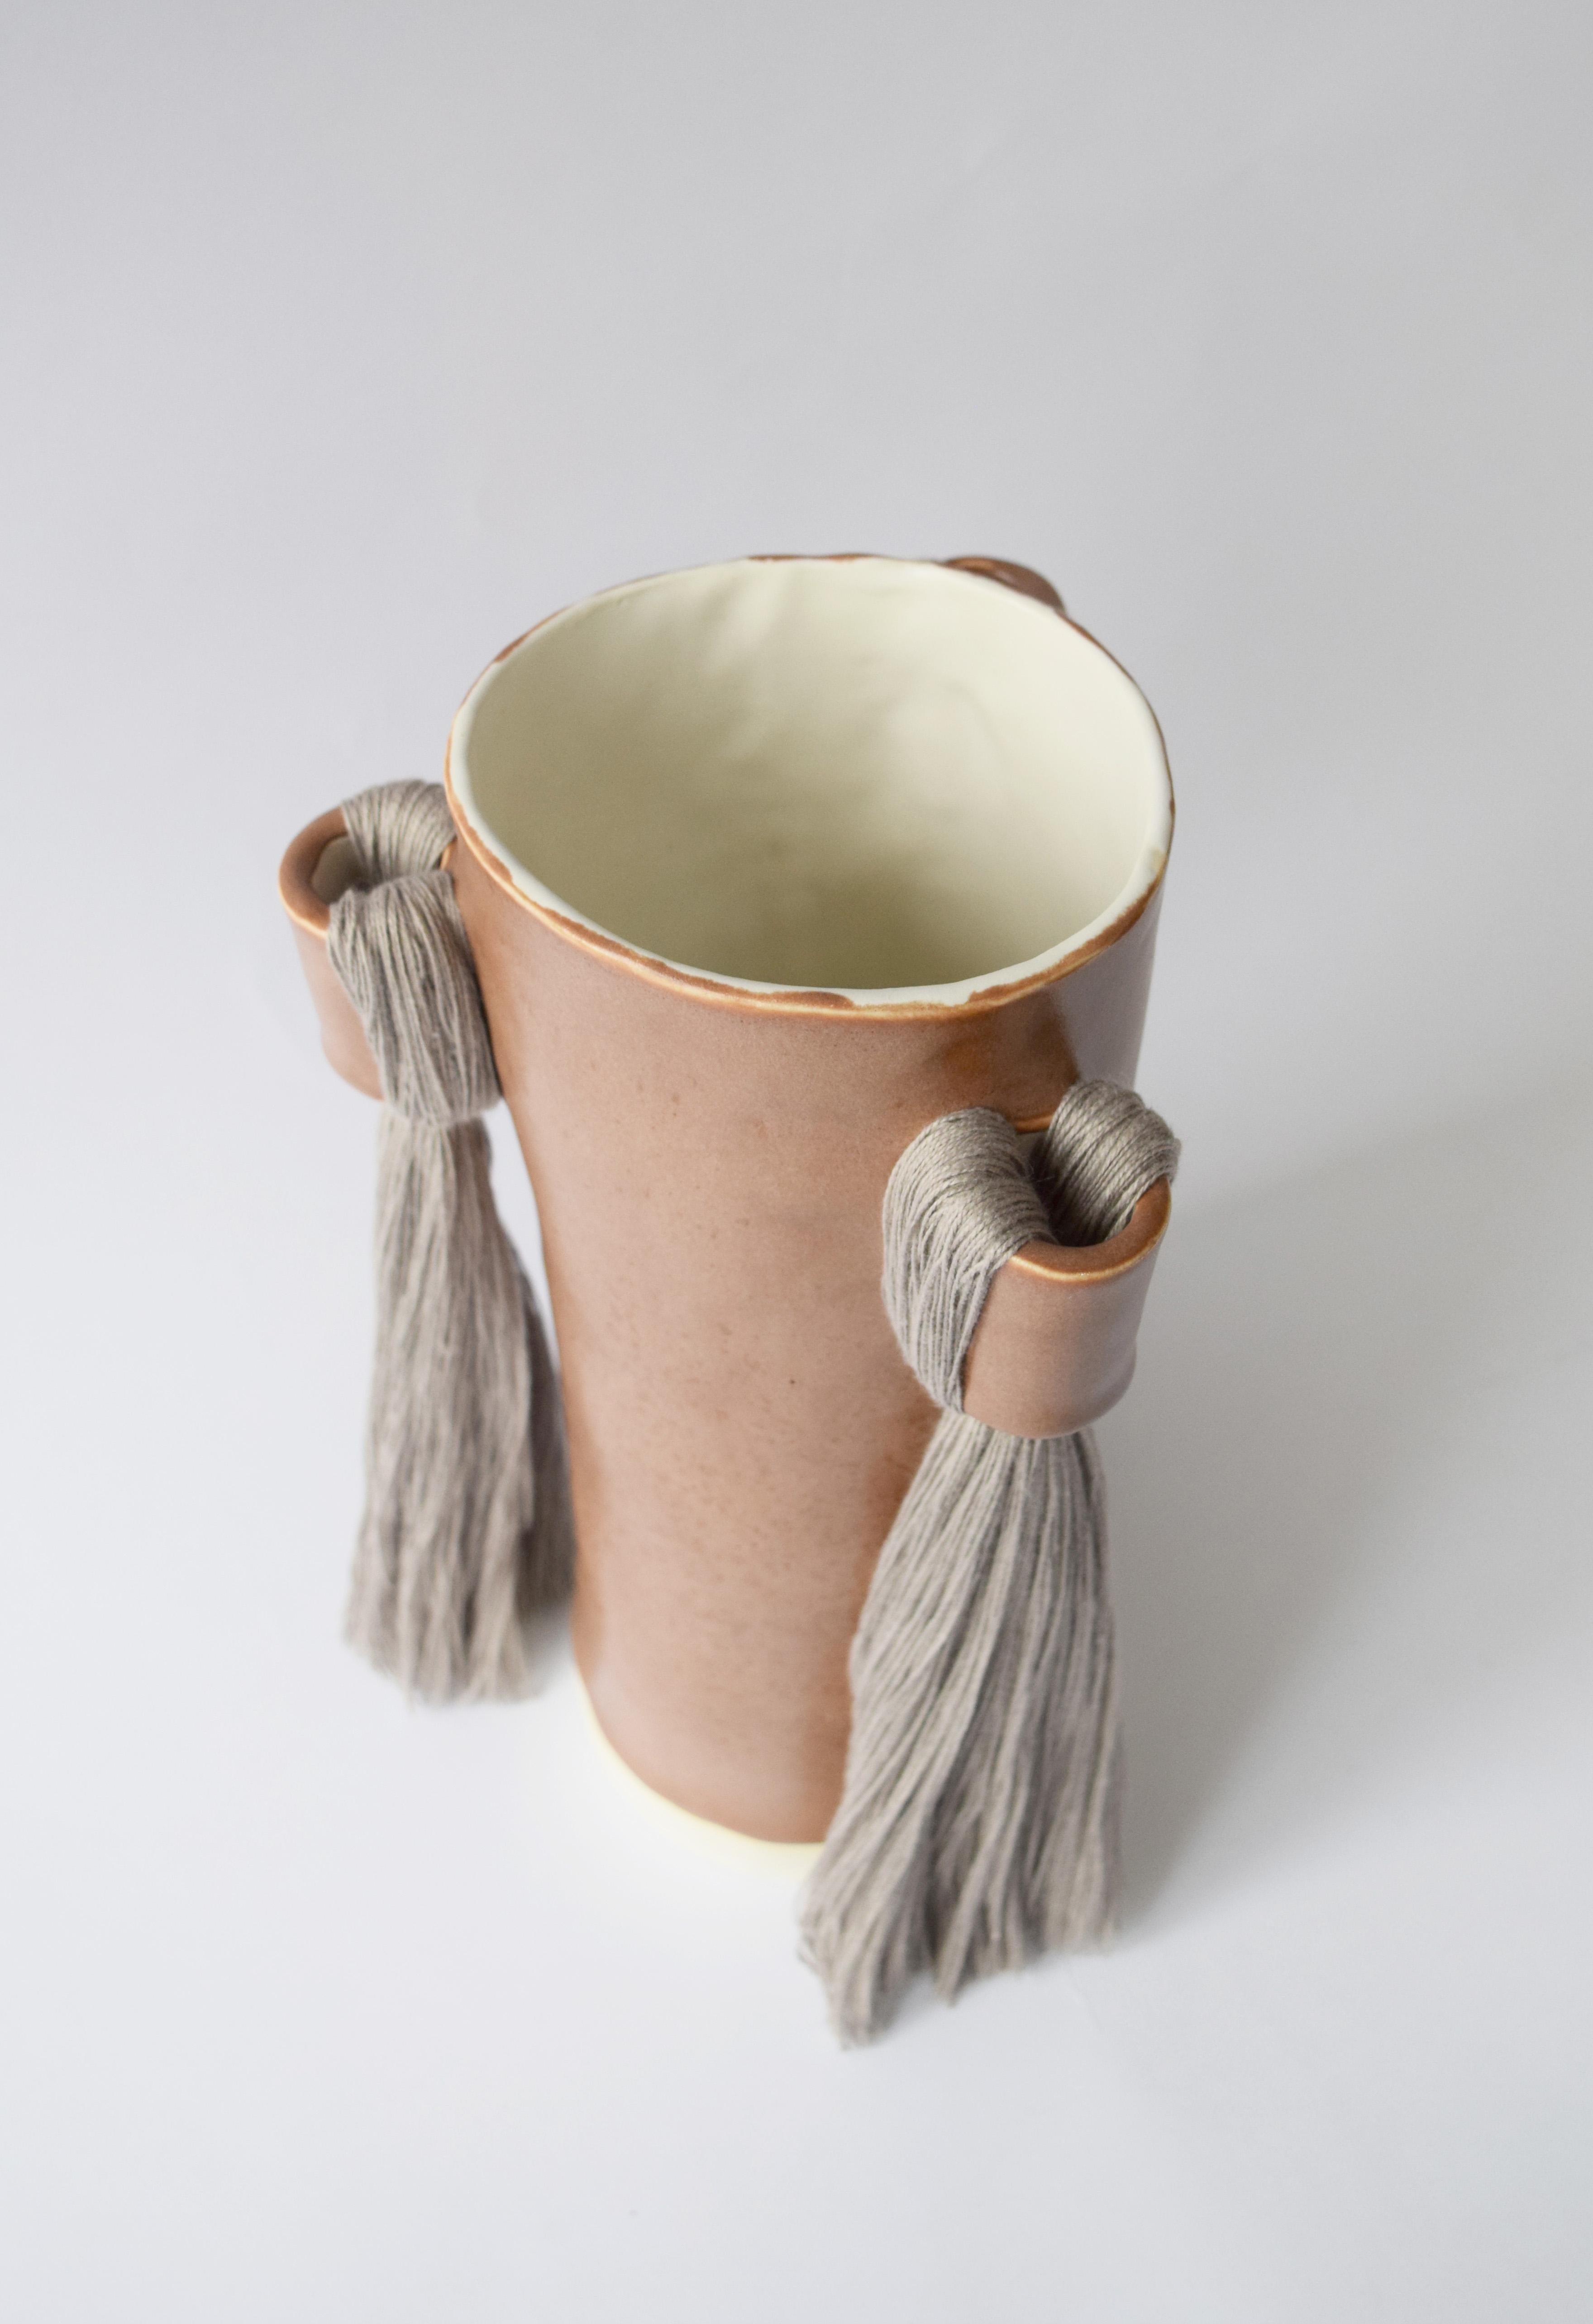 Vase #607 by Karen Gayle Tinney

Hand formed stoneware vase with brown satin glaze. Inside is glazed white and will hold water - please take care not to damage fringe areas. Light gray cotton fringe is applied in 3 areas around the outside of the